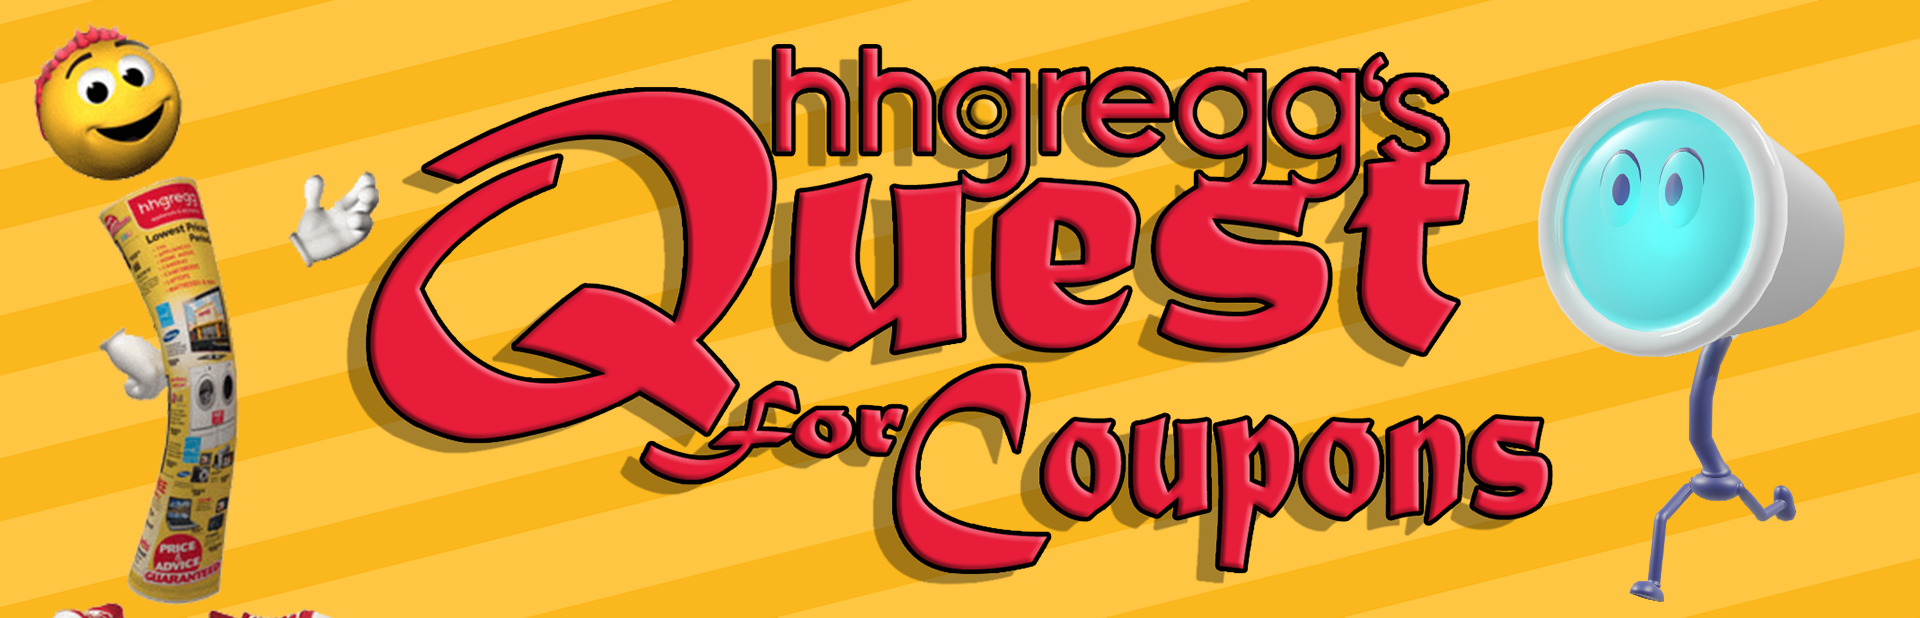 hhGregg's Quest for Coupons